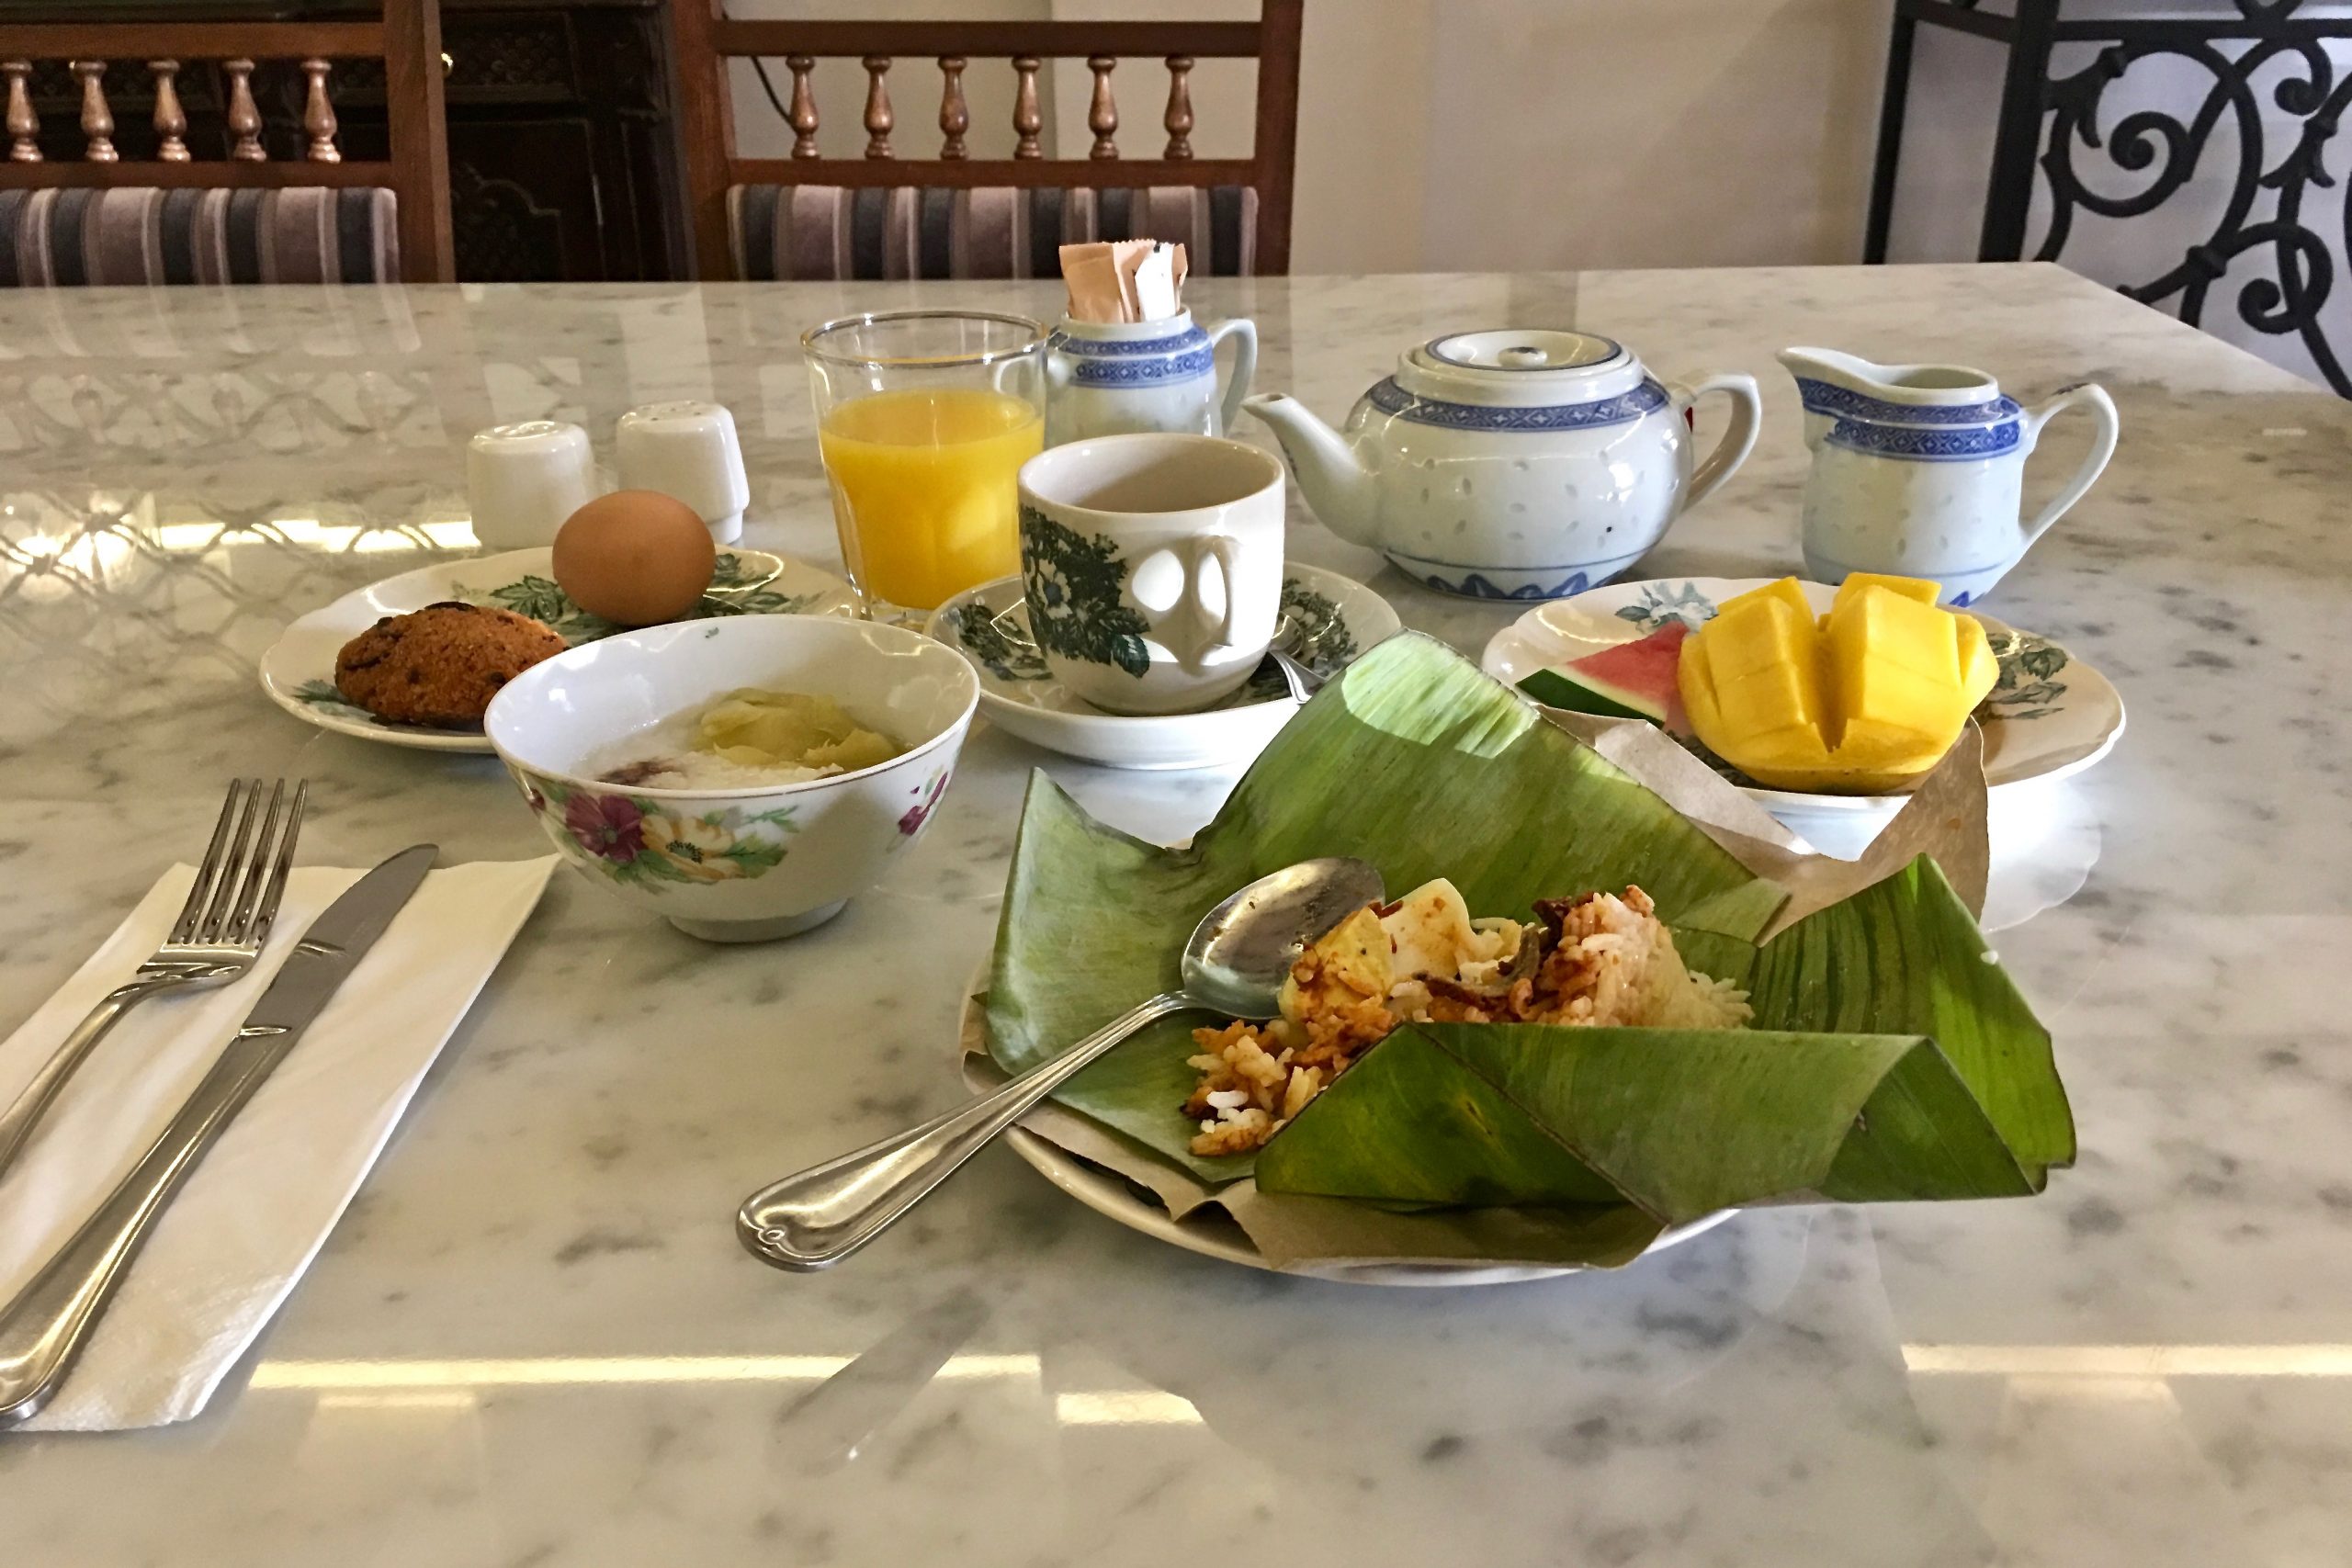 Breakfast | Mansion Room | Jawi Peranakan Mansion | Food For Thought